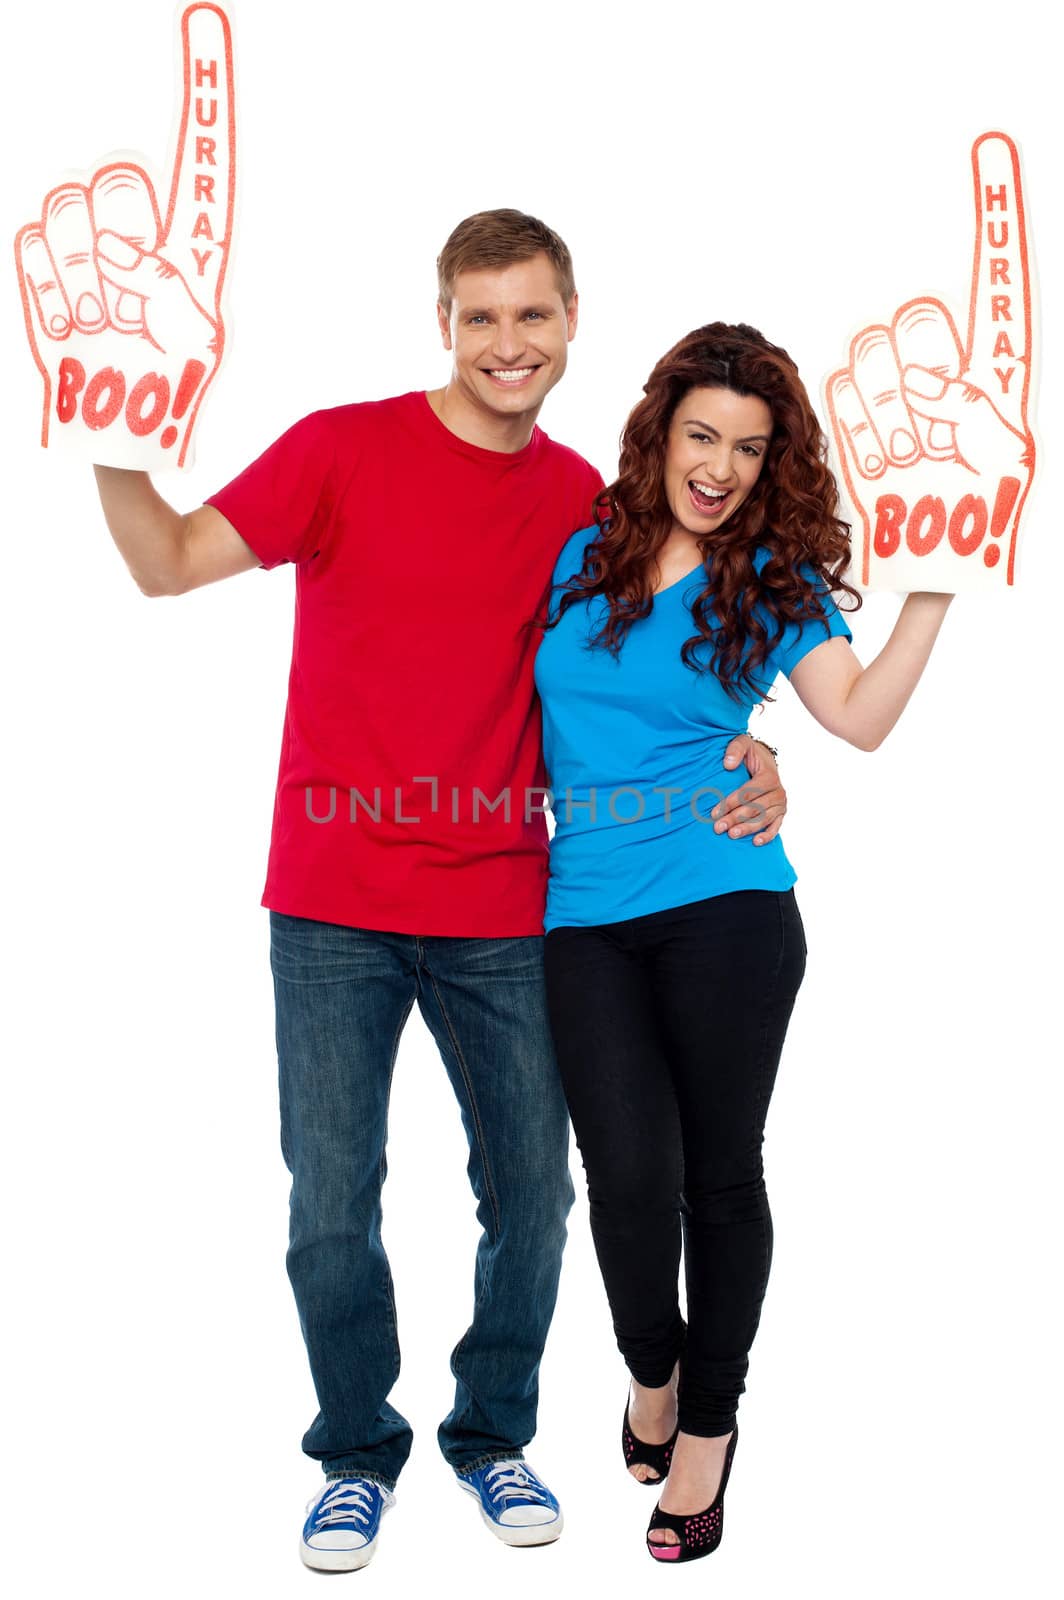 Excite young couple showing boo hurray foam hand and cheering against white background